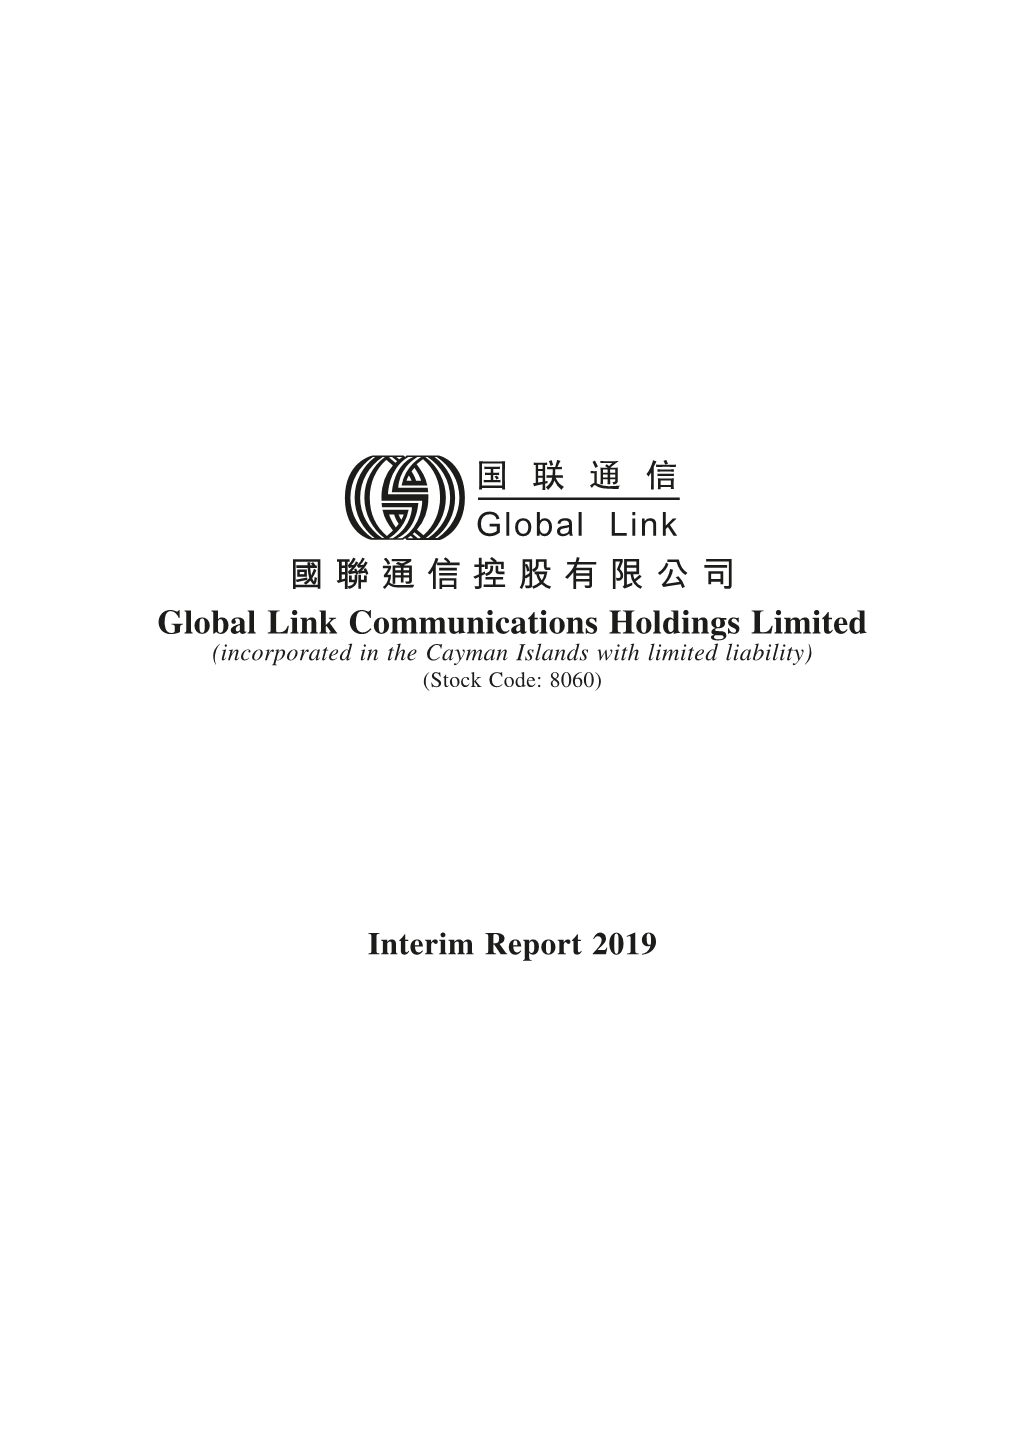 Interim Report 2019 CHARACTERISTICS of GEM of the STOCK EXCHANGE of HONG KONG LIMITED (THE “STOCK EXCHANGE”)